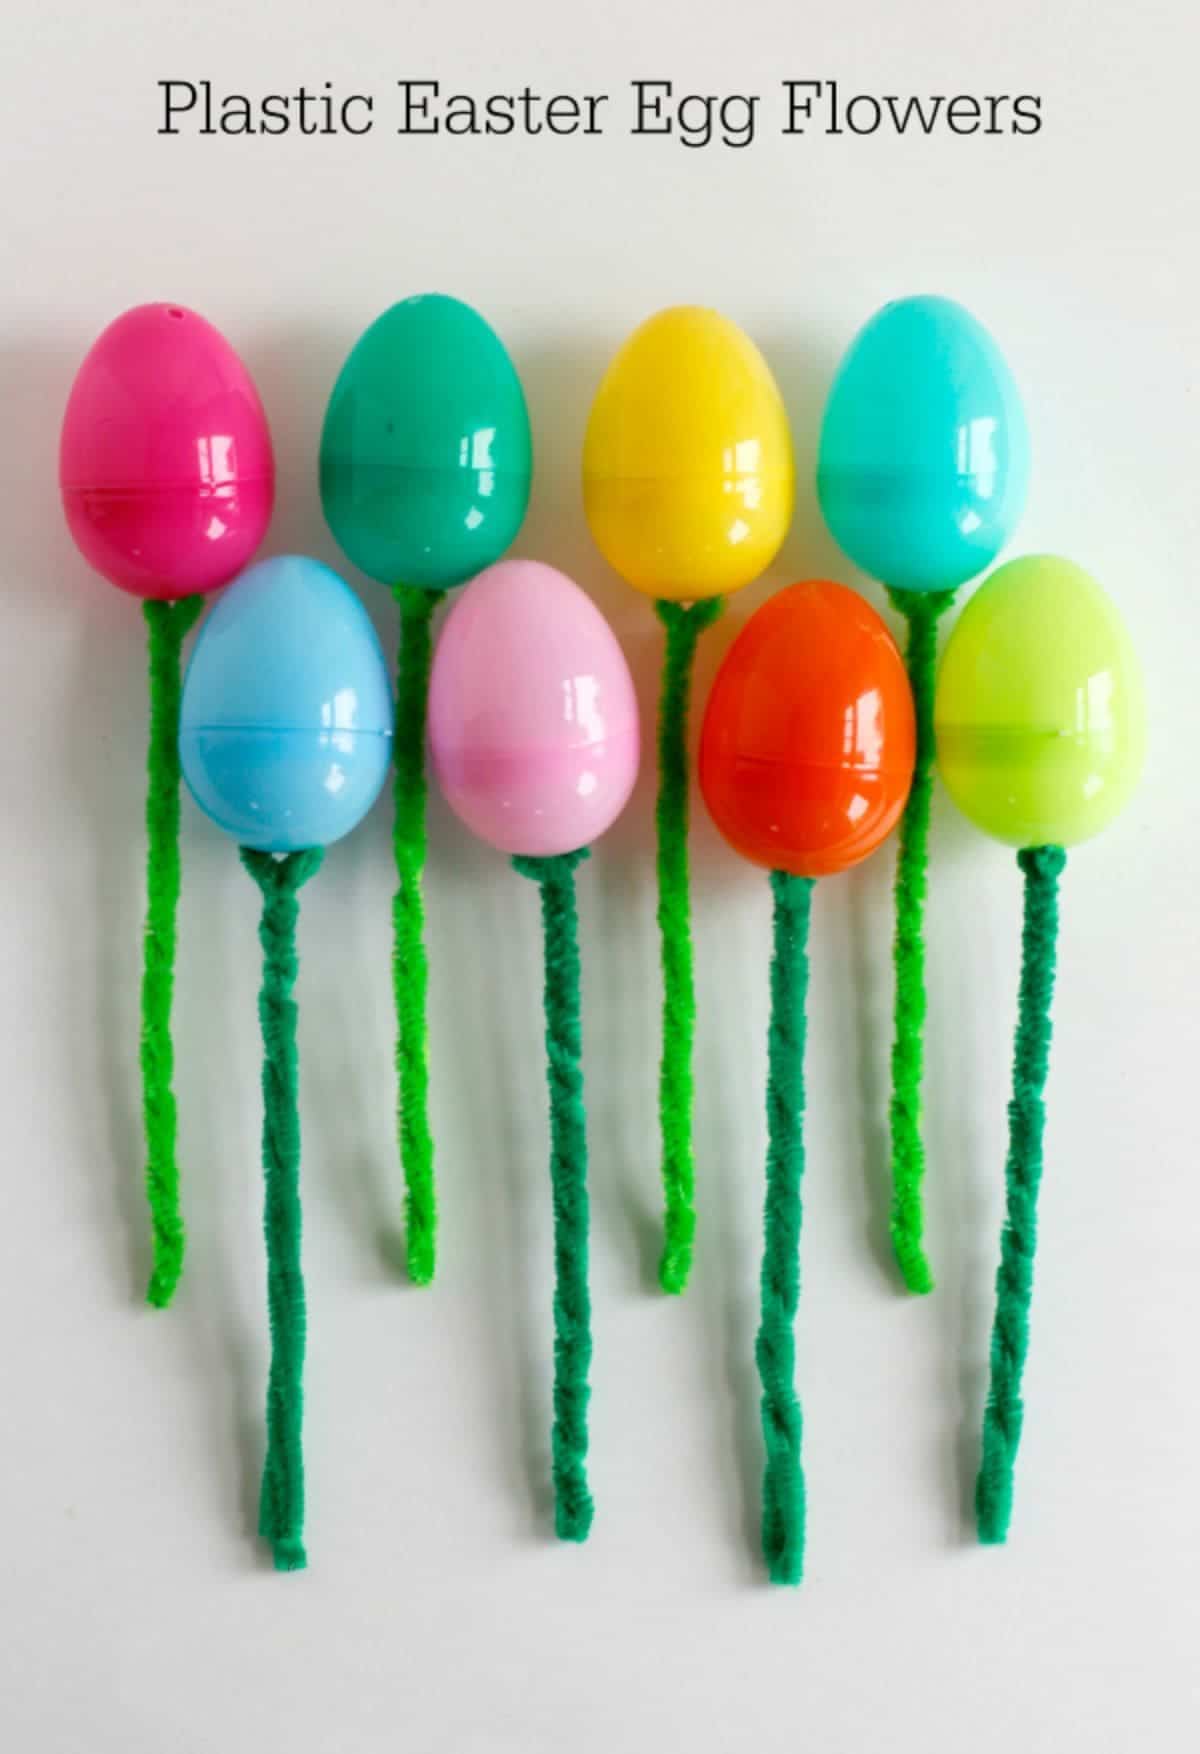 8 colored plastic eggs have been stuck on top of 8 green pipe cleaners on a white background